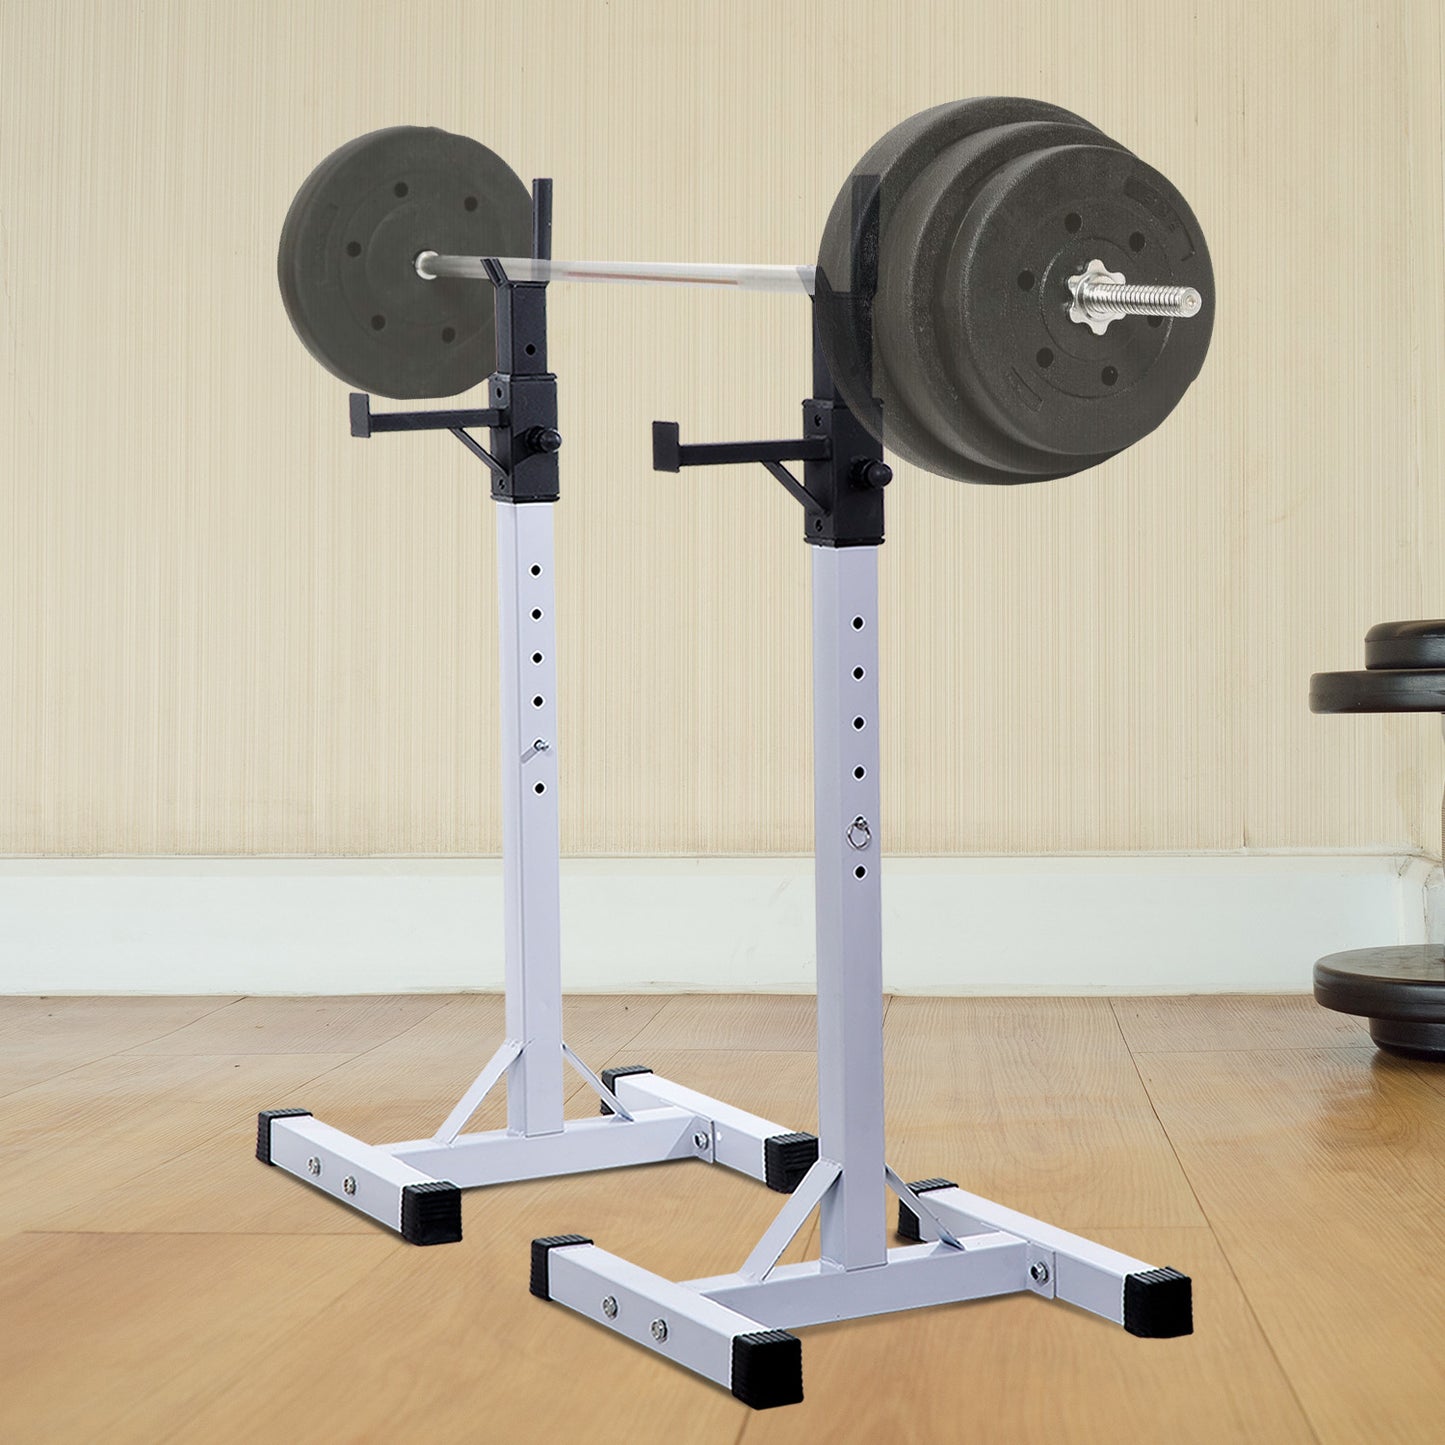 HOMCOM Adjustable Weights Barbell Stand Squat Stand Rack-White/Black